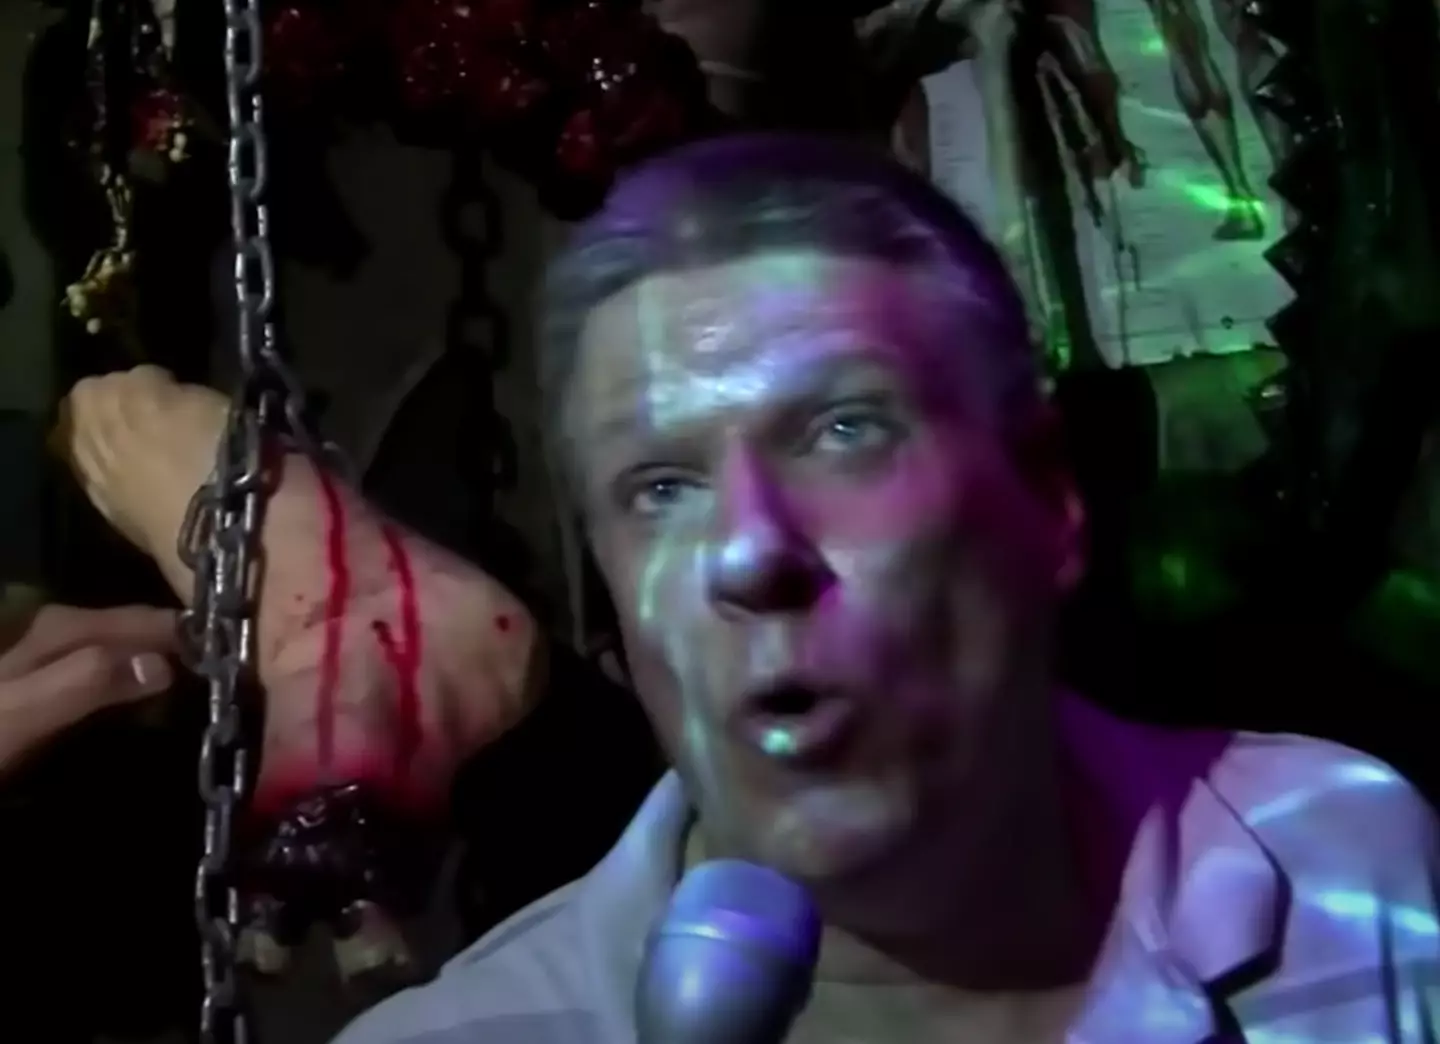 Monster Inside claims to expose McKamey Manor.